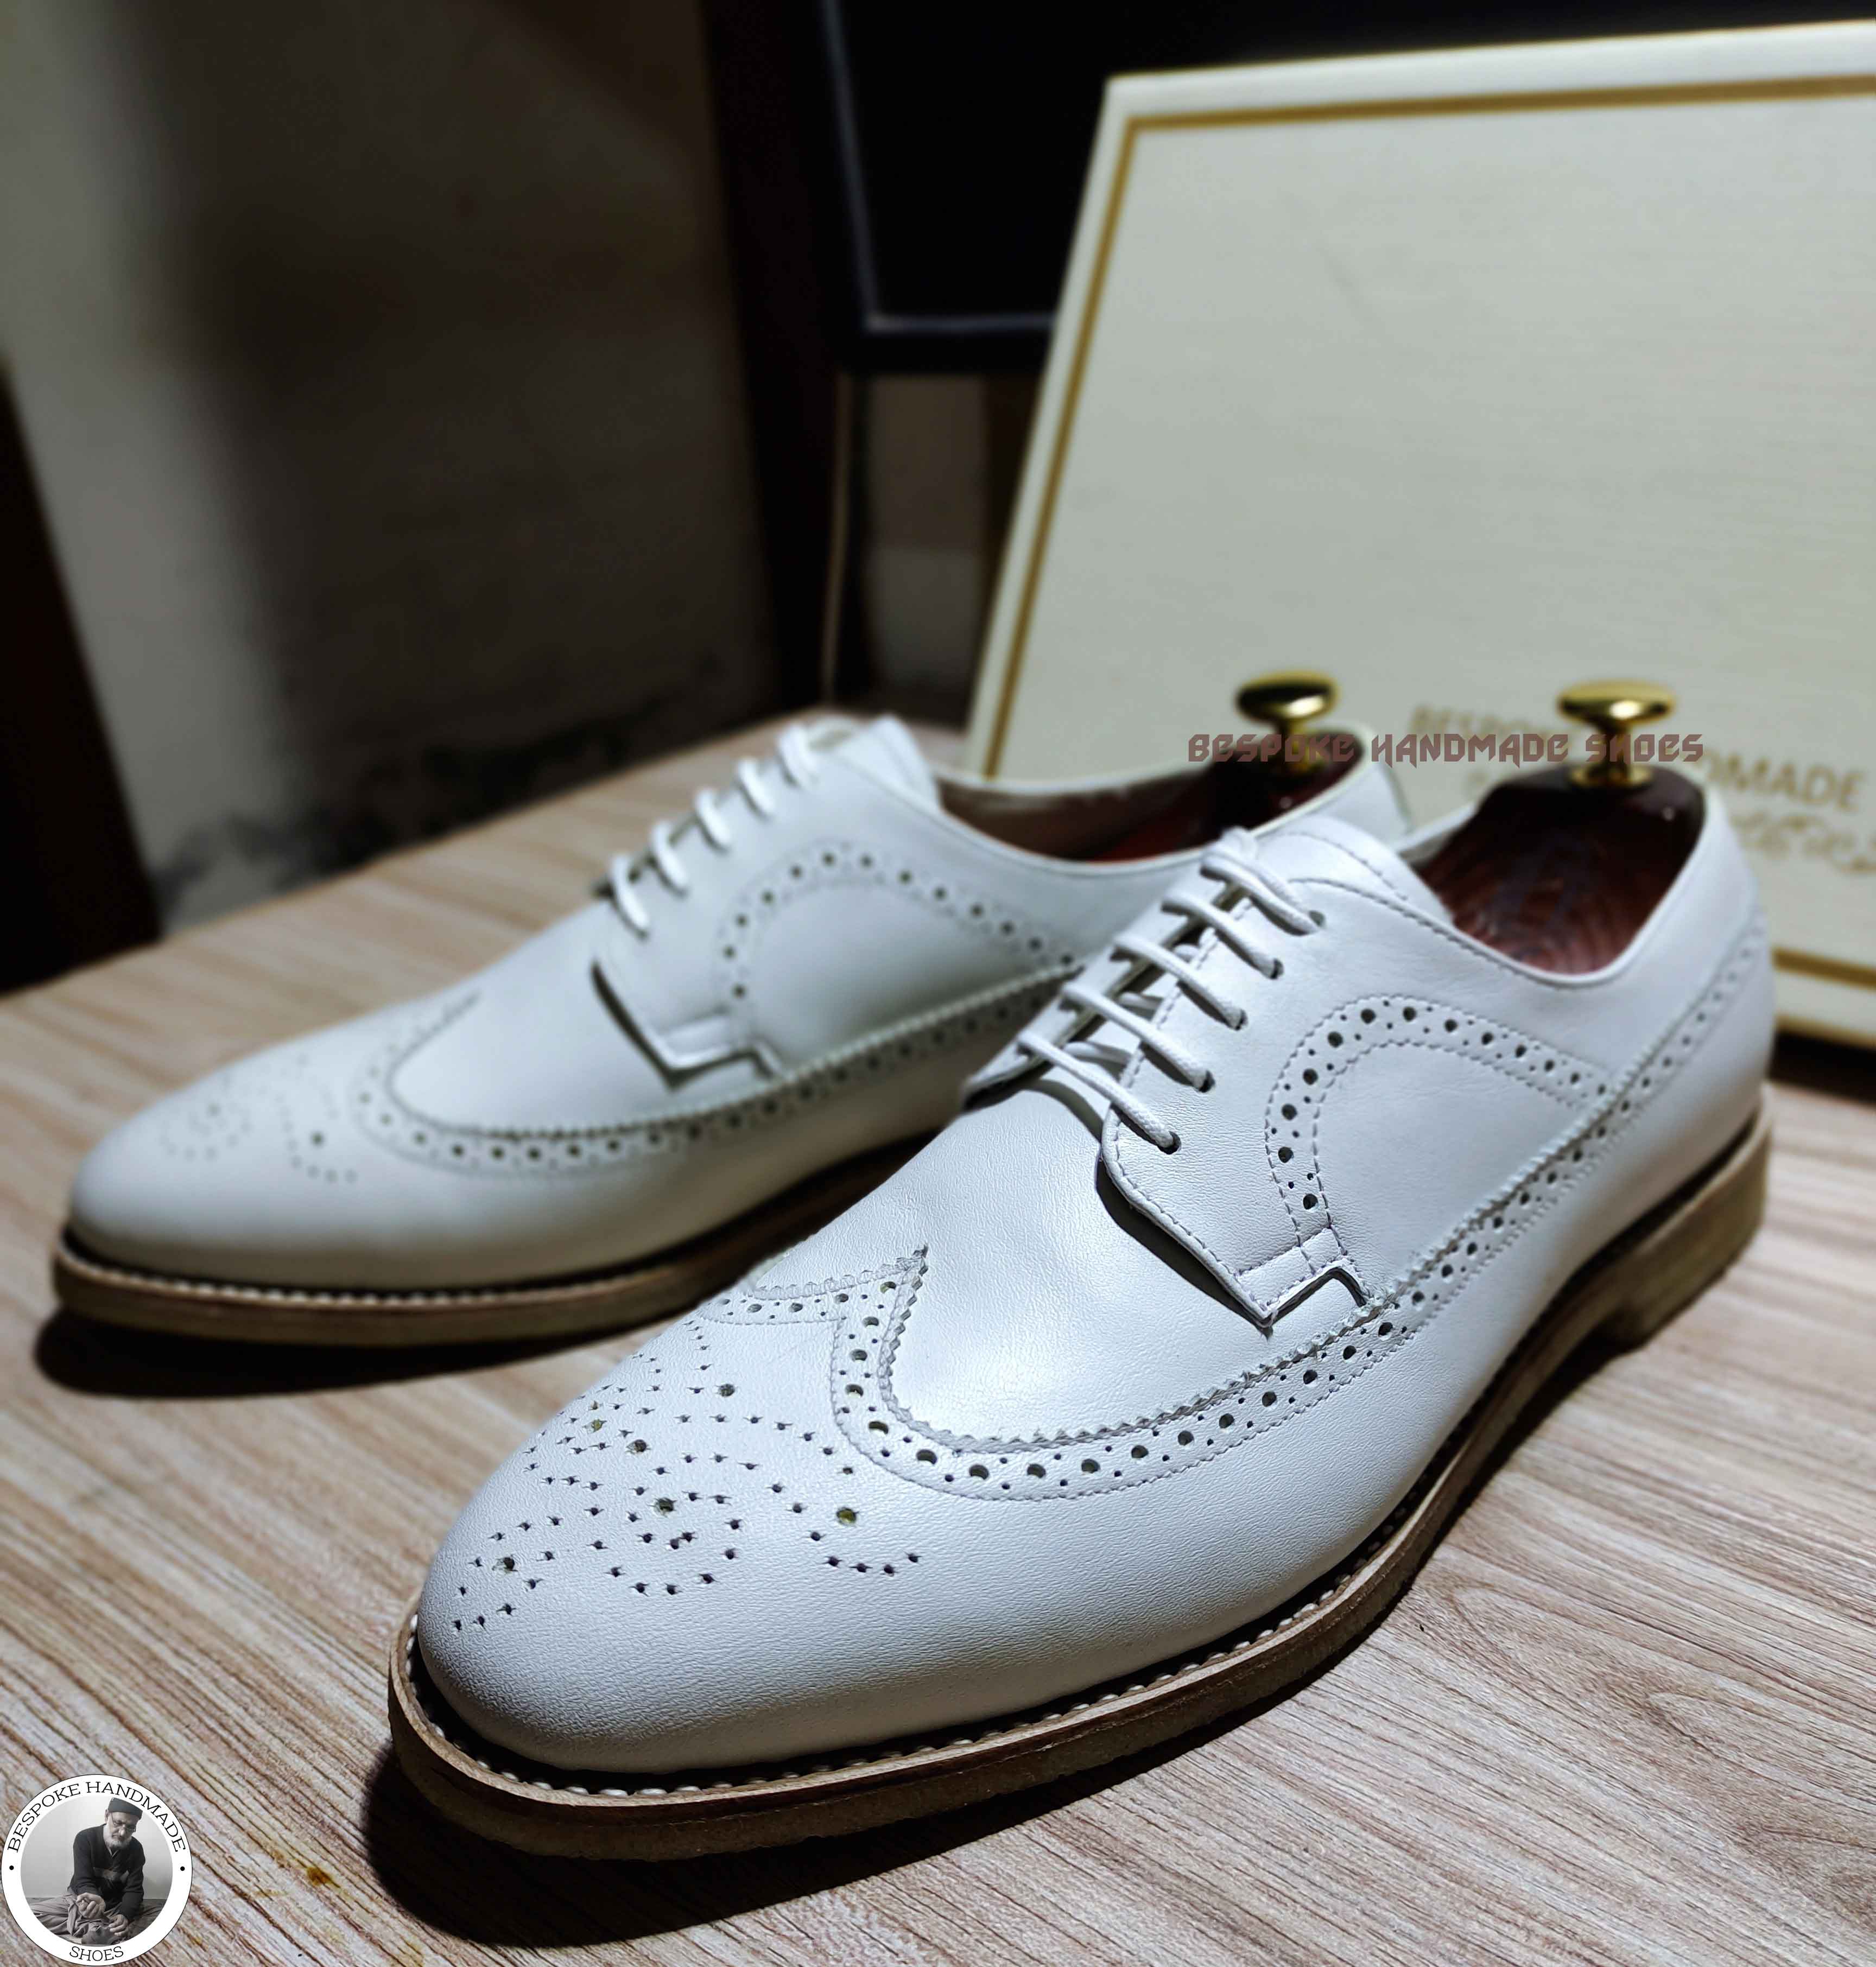 New Handmade Dress Shoes, Pure White Leather Oxford Wingtip Lace Up Dress Shoe